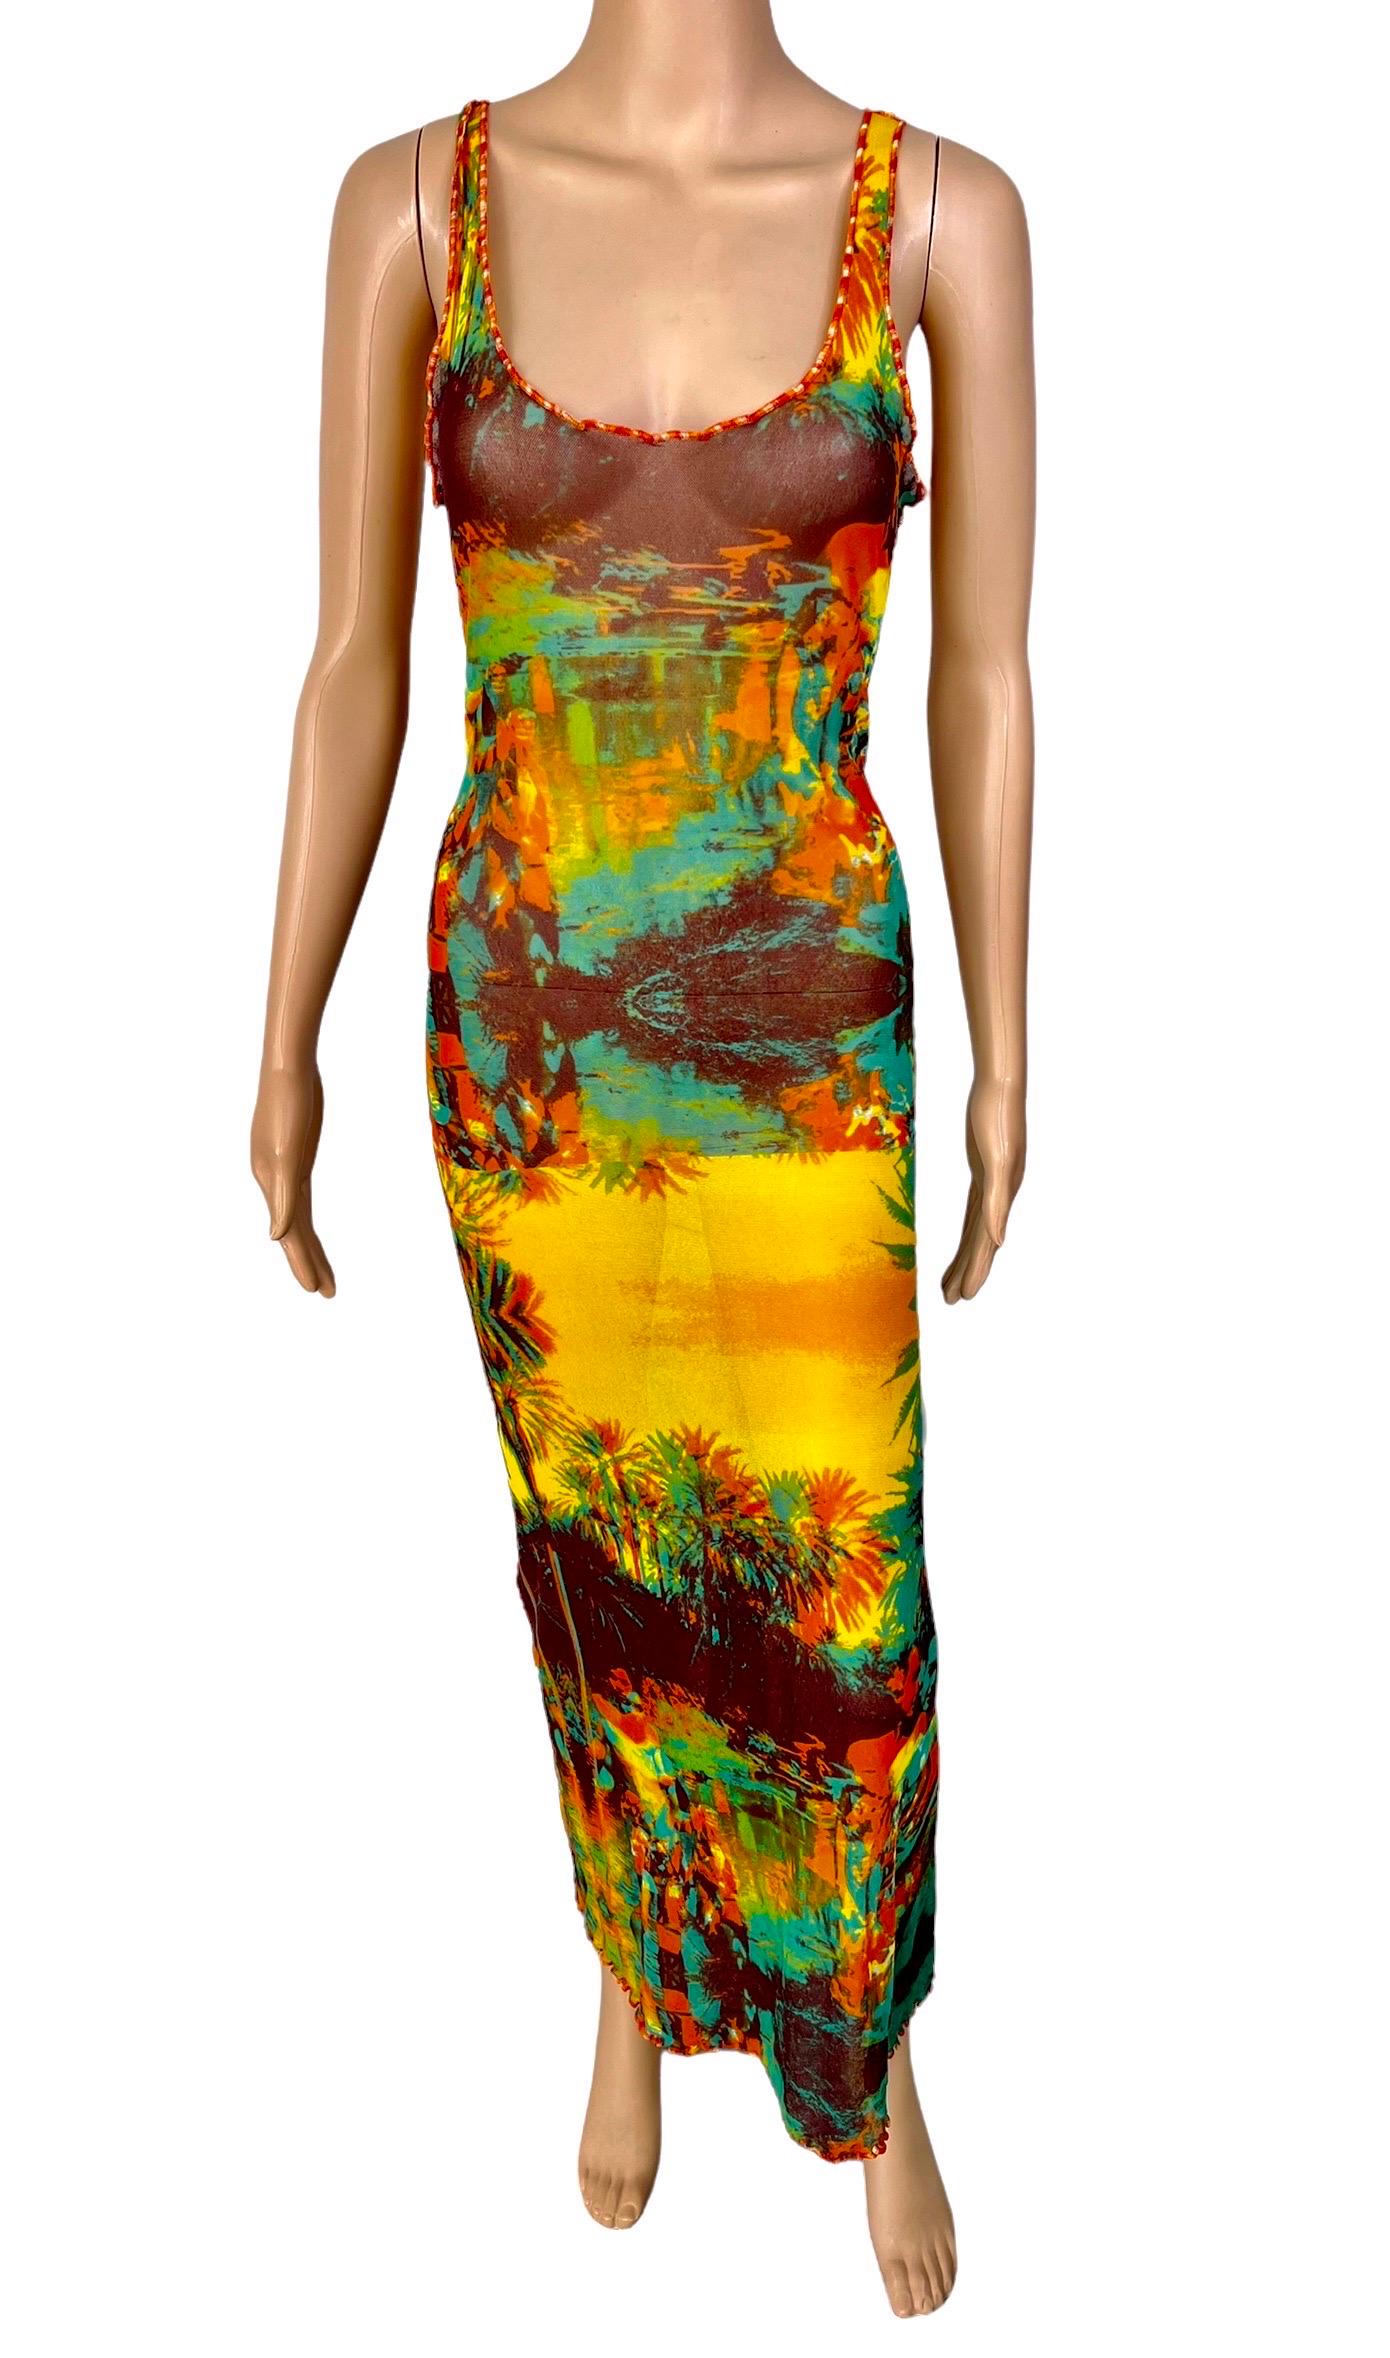 Jean Paul Gaultier S/S 2000 Vintage Psychedelic Print Bodycon Sheer Mesh Maxi Dress 

Please note size tag has been removed.

